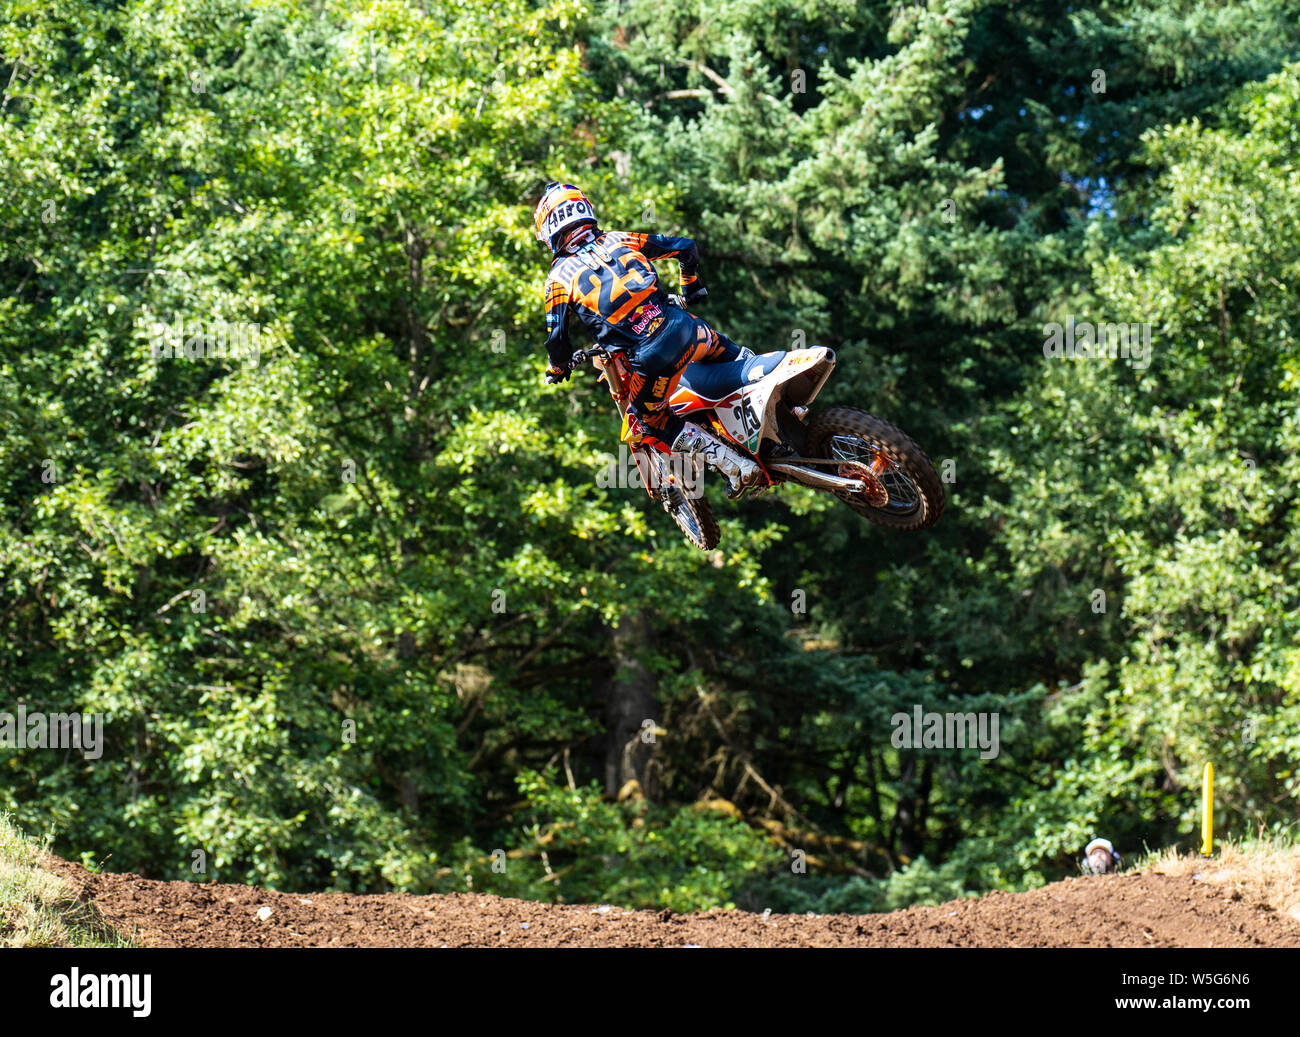 Washougal, WA USA. 27th July, 2019. # 25 Marvin Musqin gets air going up hill between section 18 and 19 section during the Lucas Oil Pro Motocross Washougal National 450 class championship at Washougal MX park Washougal, WA Thurman James/CSM/Alamy Live News Stock Photo